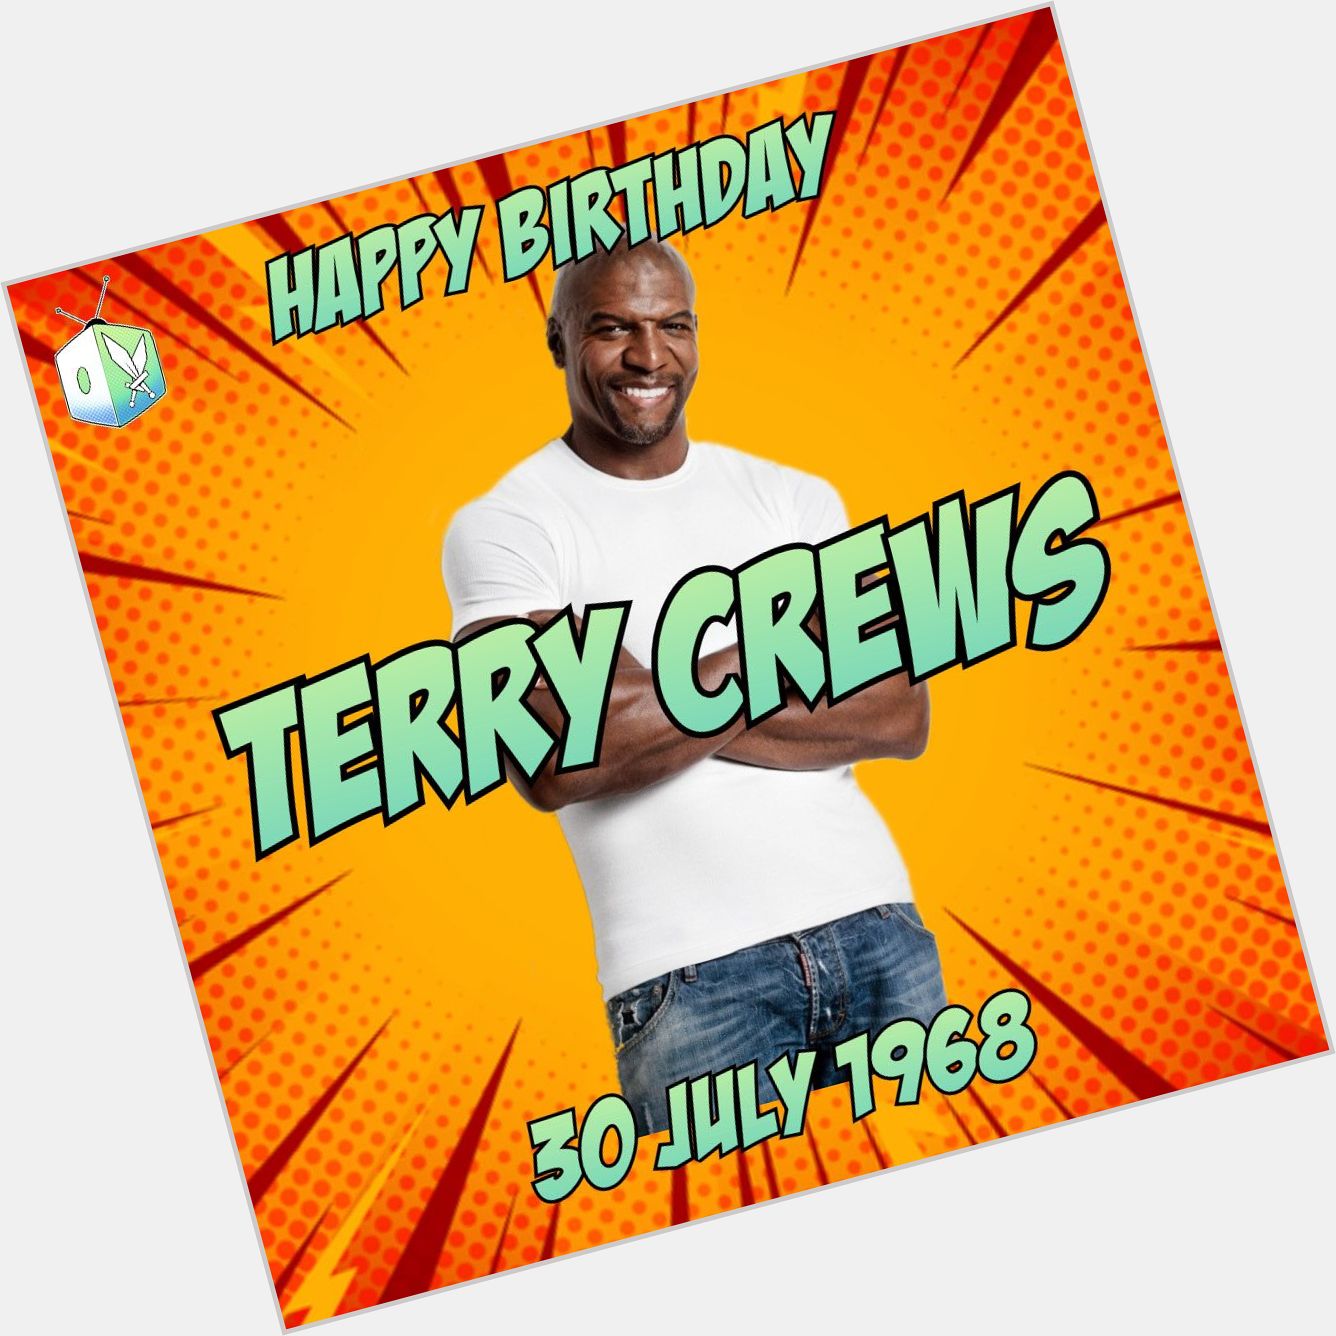 The man, the myth, the LEGEND! Happy birthday to Terry Crews! 